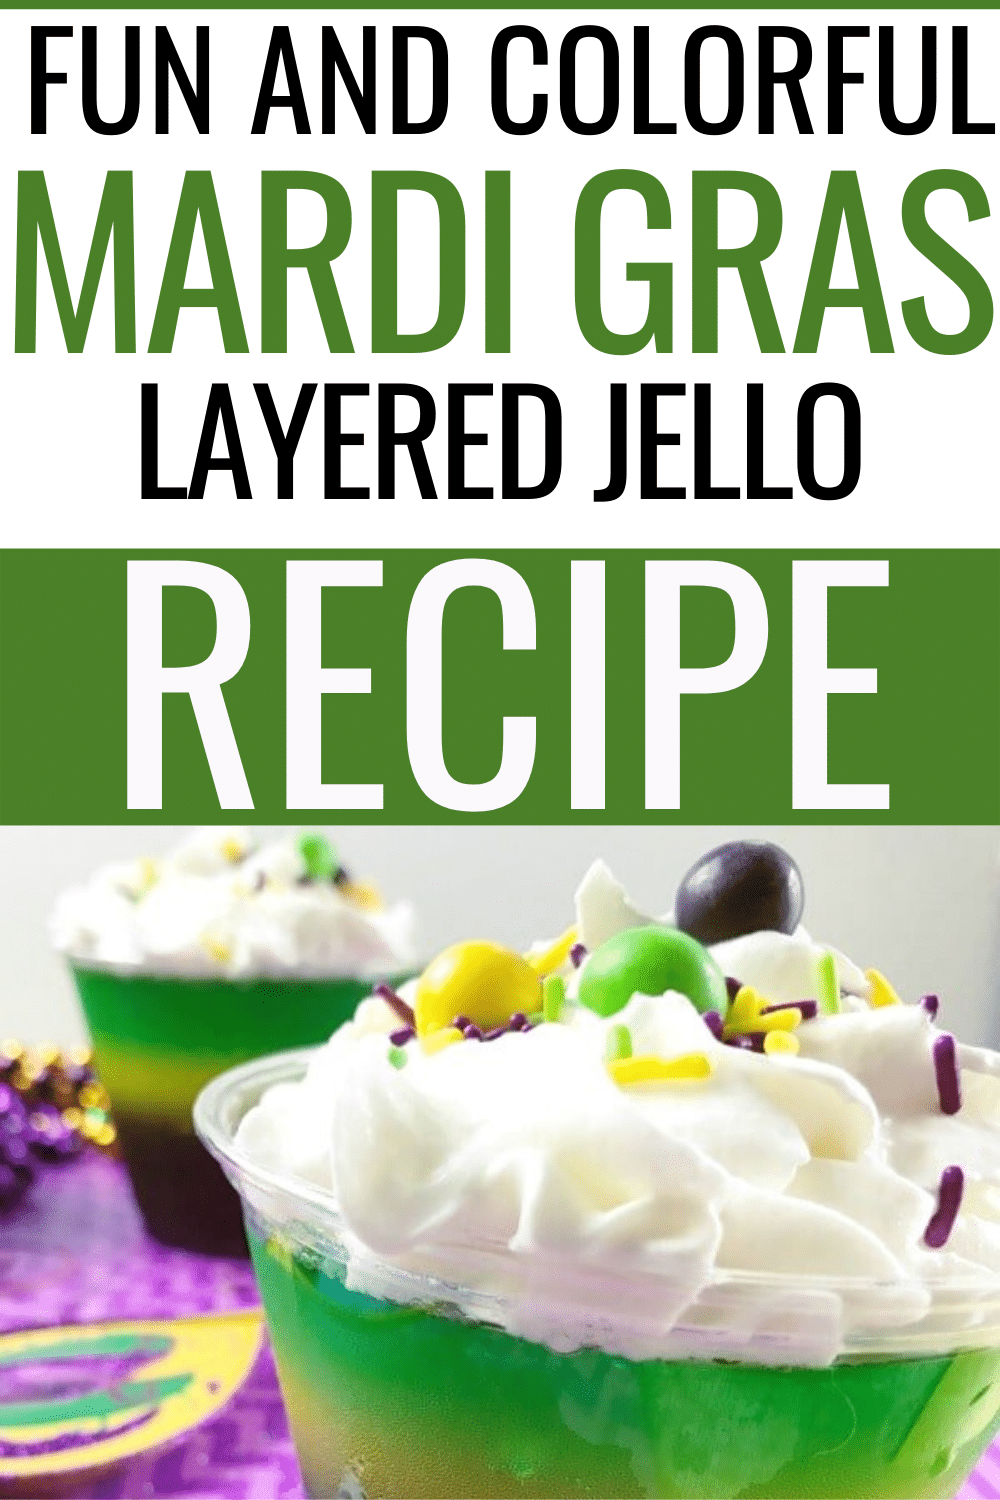 Mardi Gras Layered Jello Cups are the perfect colorful dessert to celebrate Fat Tuesday. A family friendly treat these Jello cups are simple to make ahead. #mardigras #fattuesday #jello via @wondermomwannab